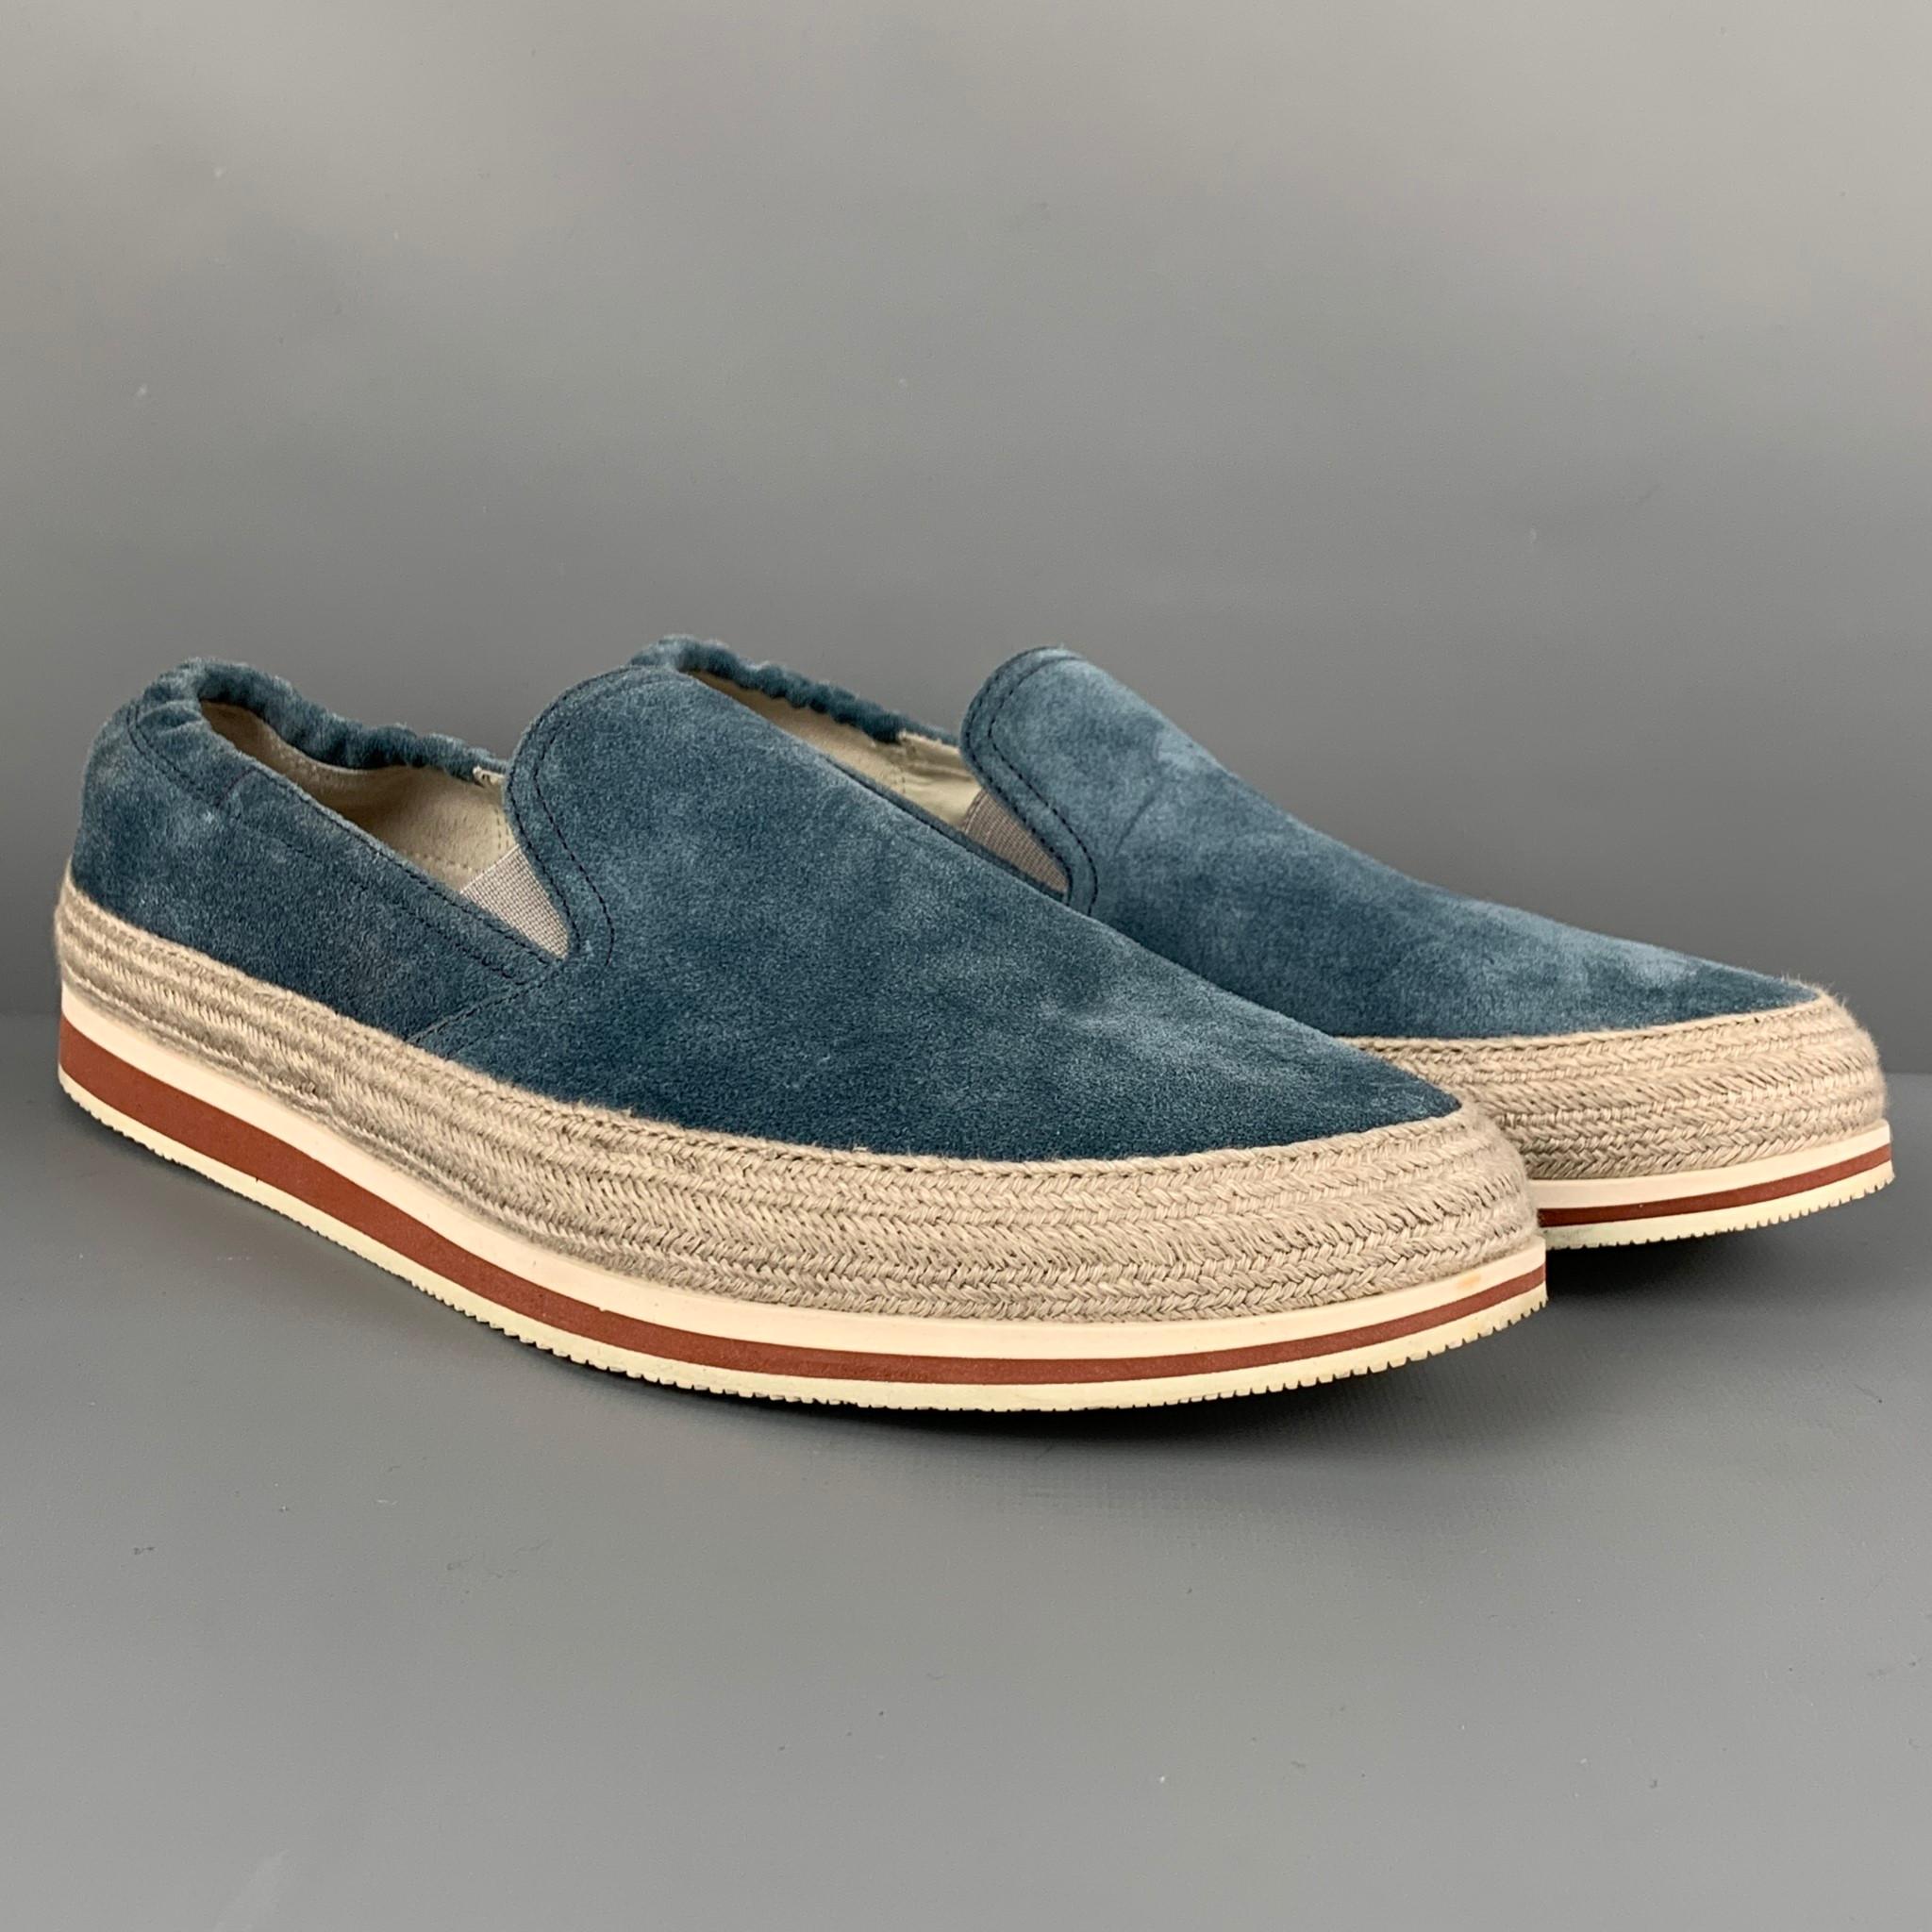 PRADA SPORT loafers comes in a blue & grey two toned suede featuring a slip on style, rope trim, and a rubber sole. 

Very Good Pre-Owned Condition.
Marked: 4D 2363 8

Outsole: 12 in. x 4 in. 